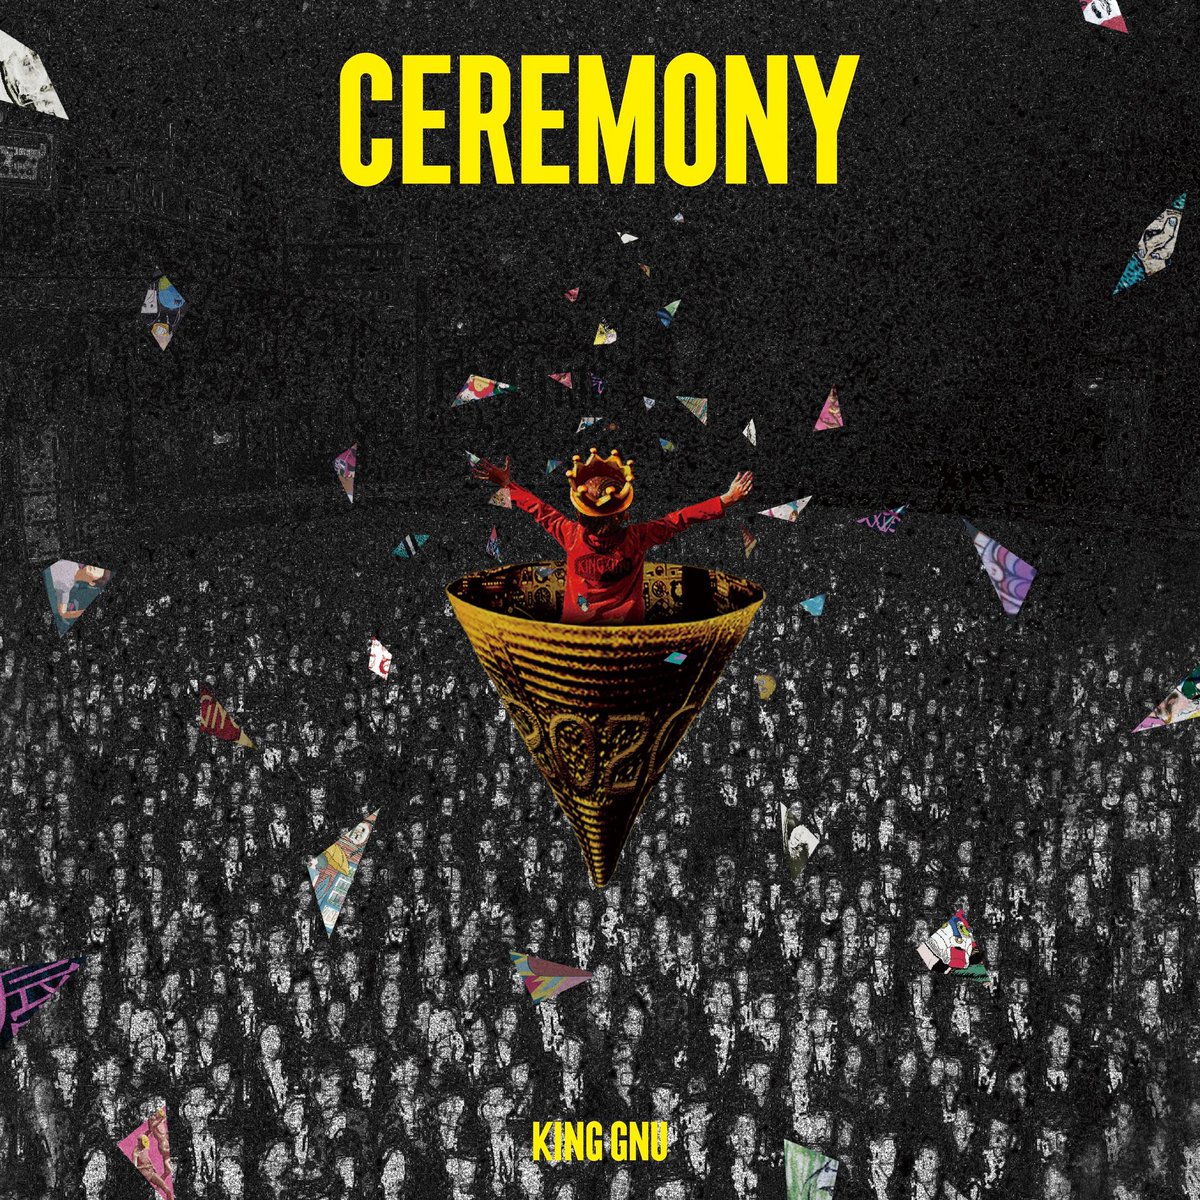 Cover art for『King Gnu - Danjo』from the release『CEREMONY』